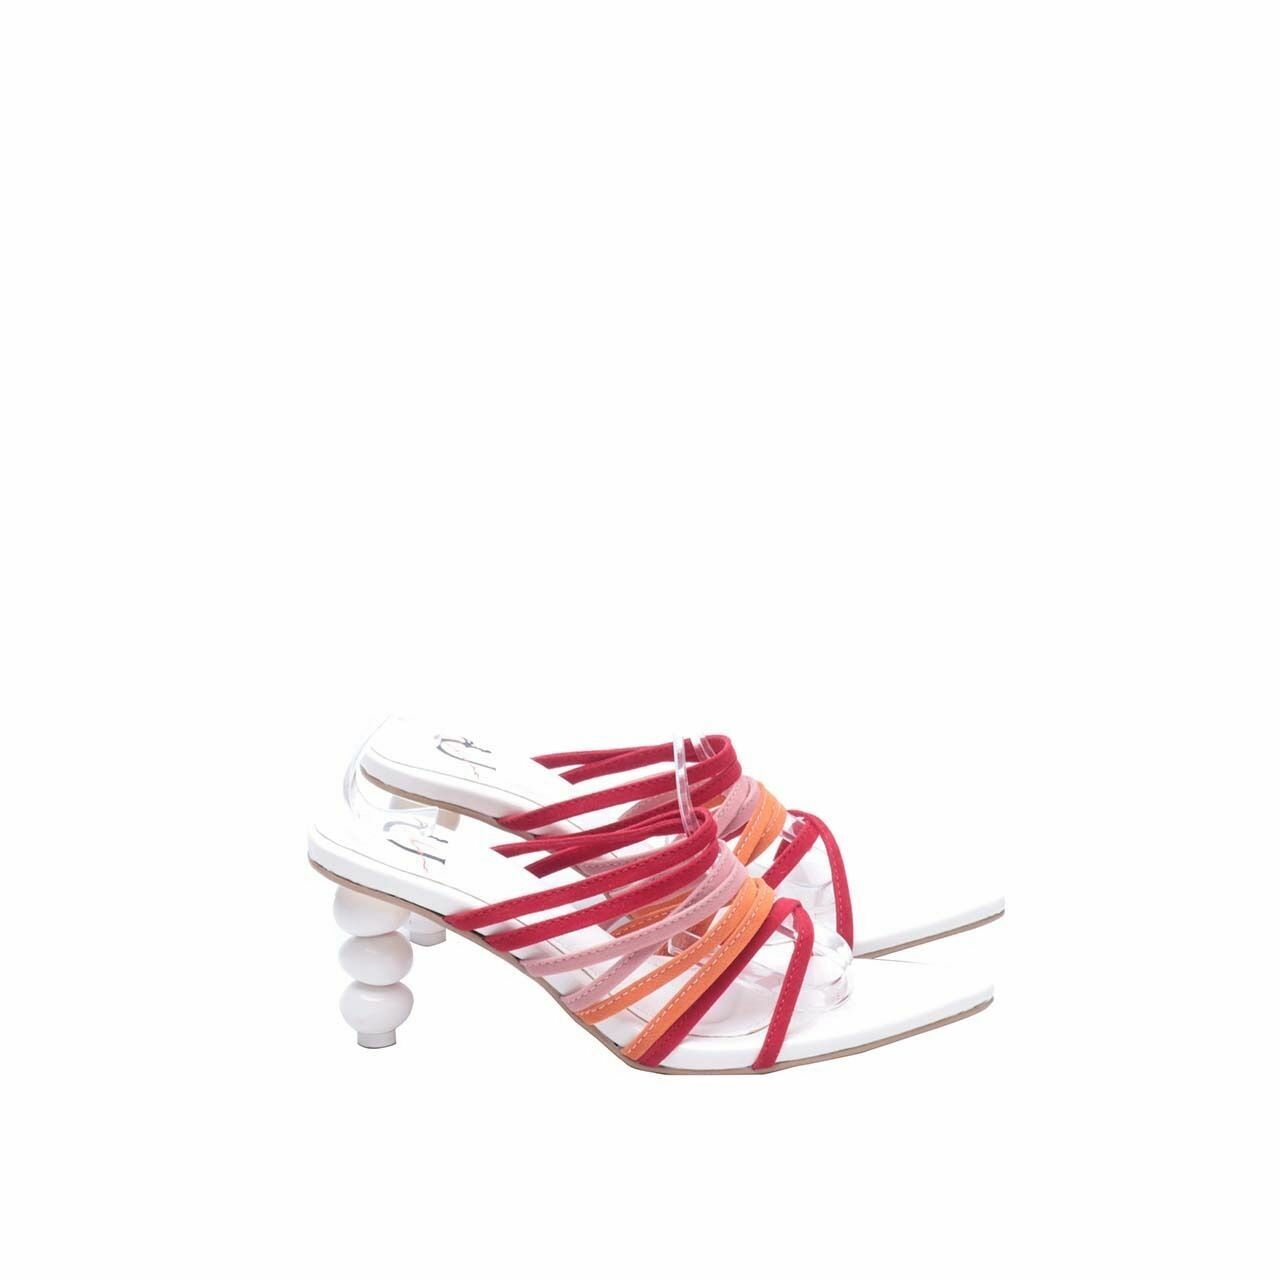 Private Collection White & Multi Suede Heels